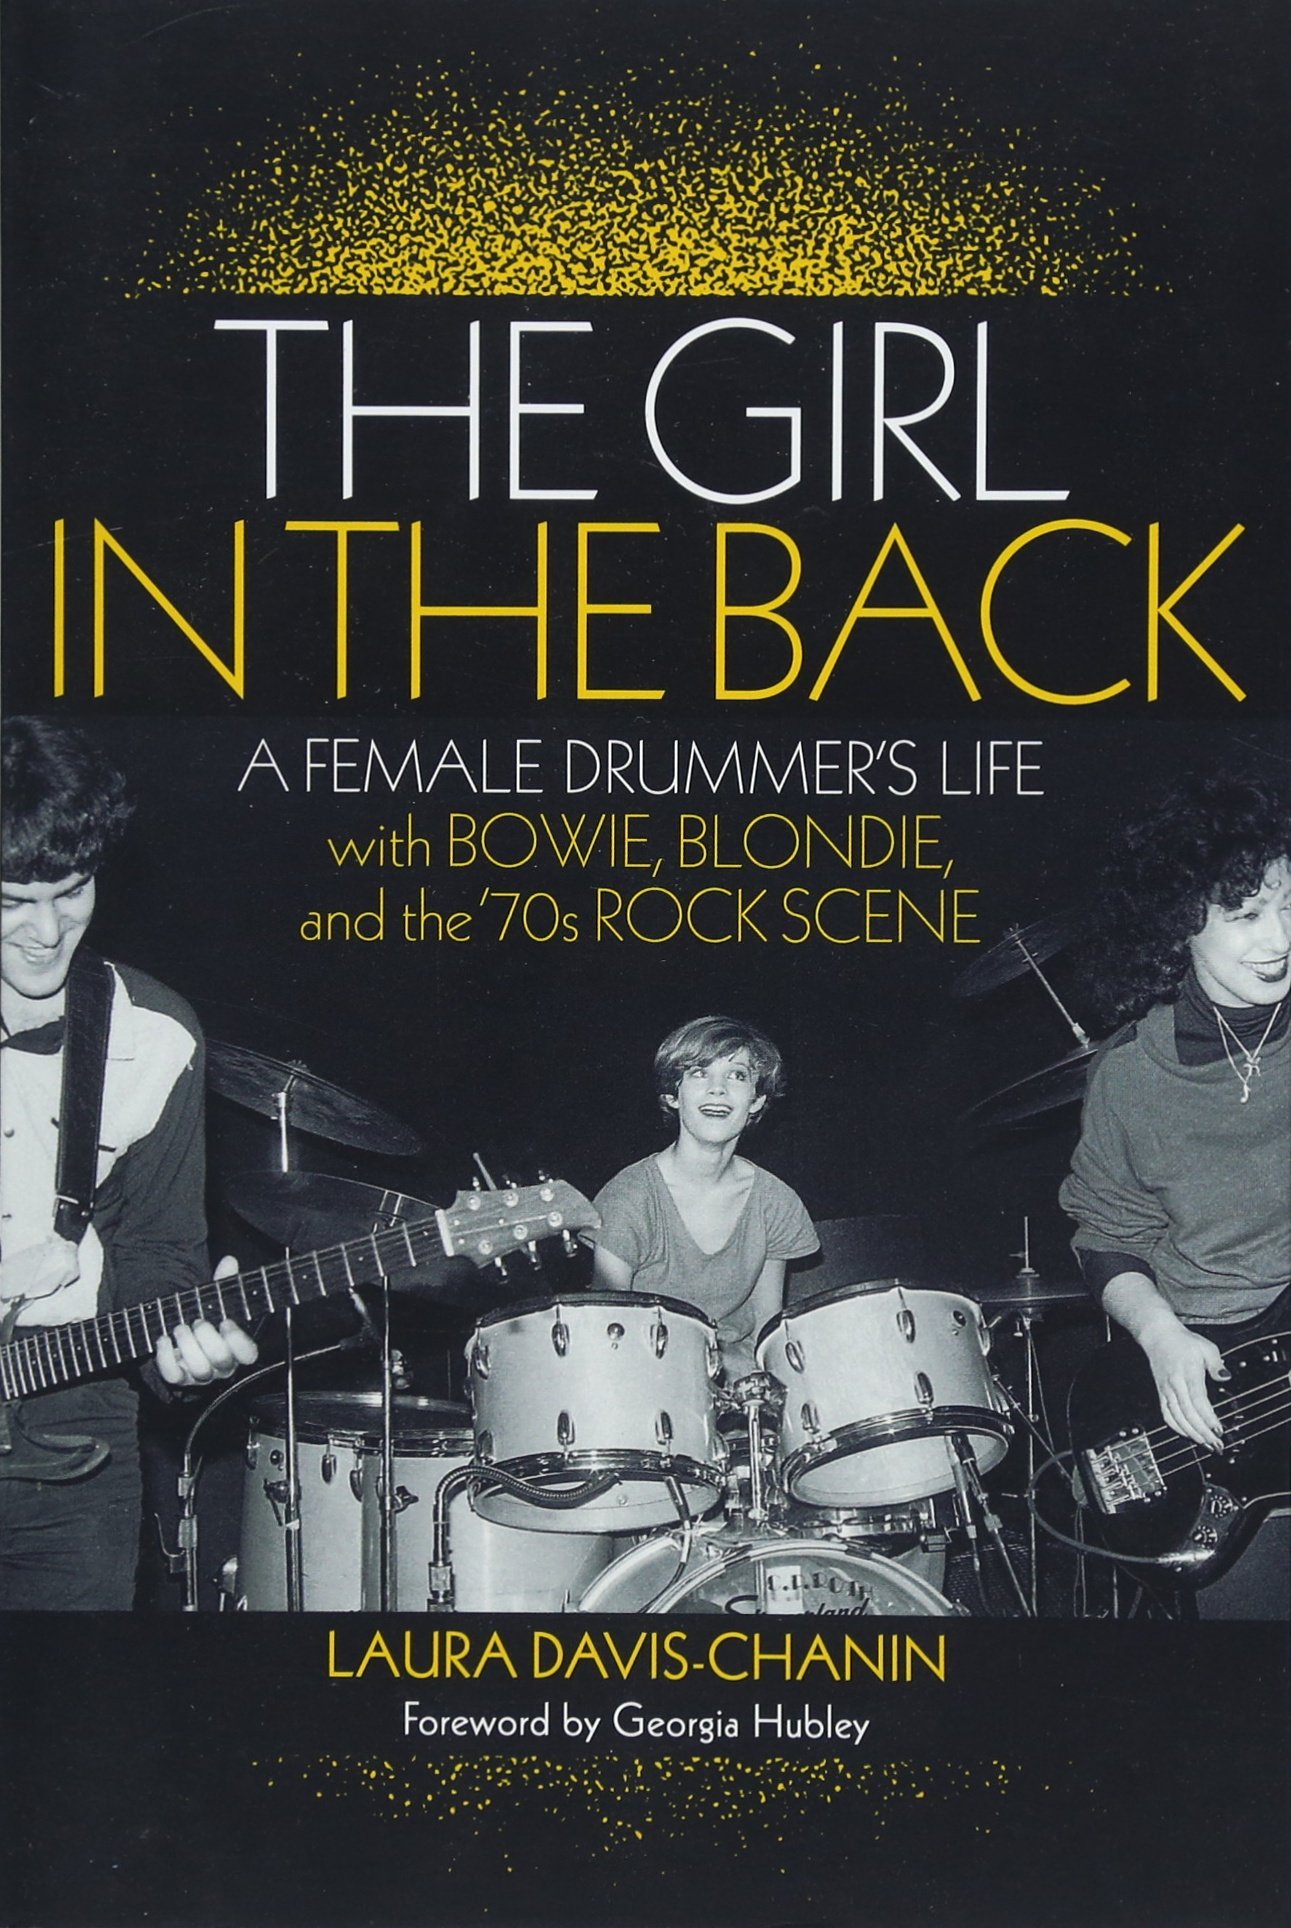 The Girl in the Back: A Female Drummer's Life with Bowie, Blondie, and the '70s Rock Scene